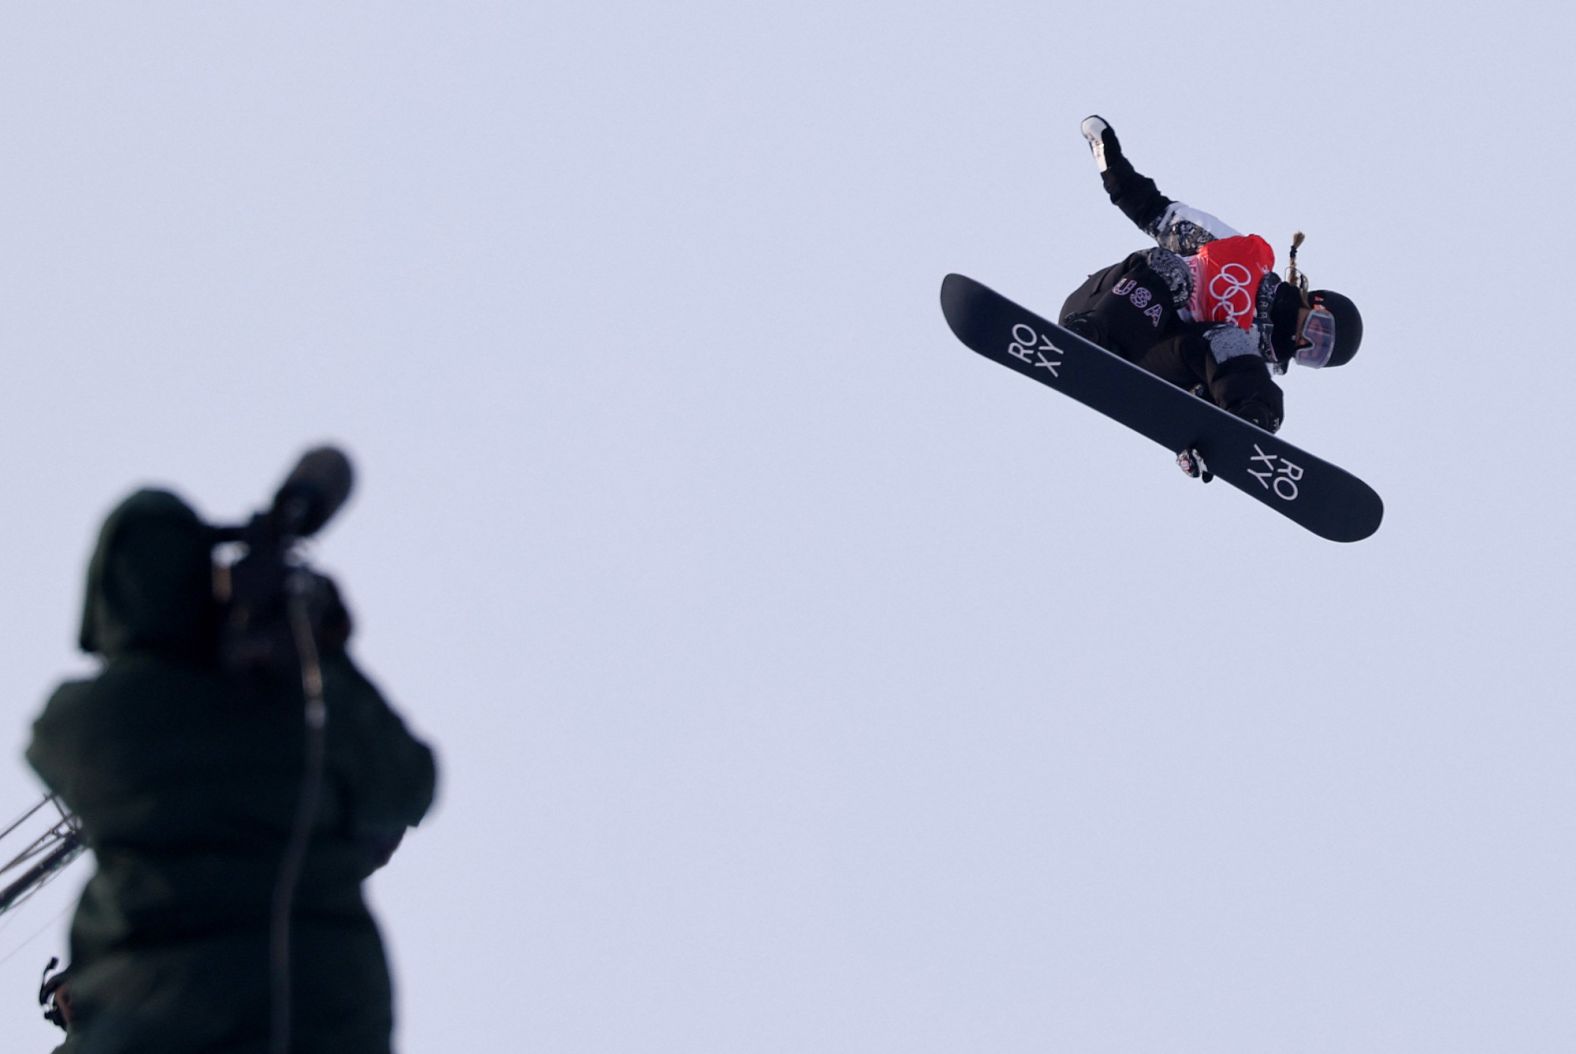 American snowboarder Chloe Kim soars through the air during halfpipe qualification on February 9. She finished with <a href="index.php?page=&url=https%3A%2F%2Fwww.cnn.com%2Fworld%2Flive-news%2Fbeijing-winter-olympics-02-09-22-spt%2Fh_1188f6db672d29f04dc4d96eb12459cf" target="_blank">the best score of the day.</a> Kim was just 17 years old when she won the halfpipe four years ago in South Korea.